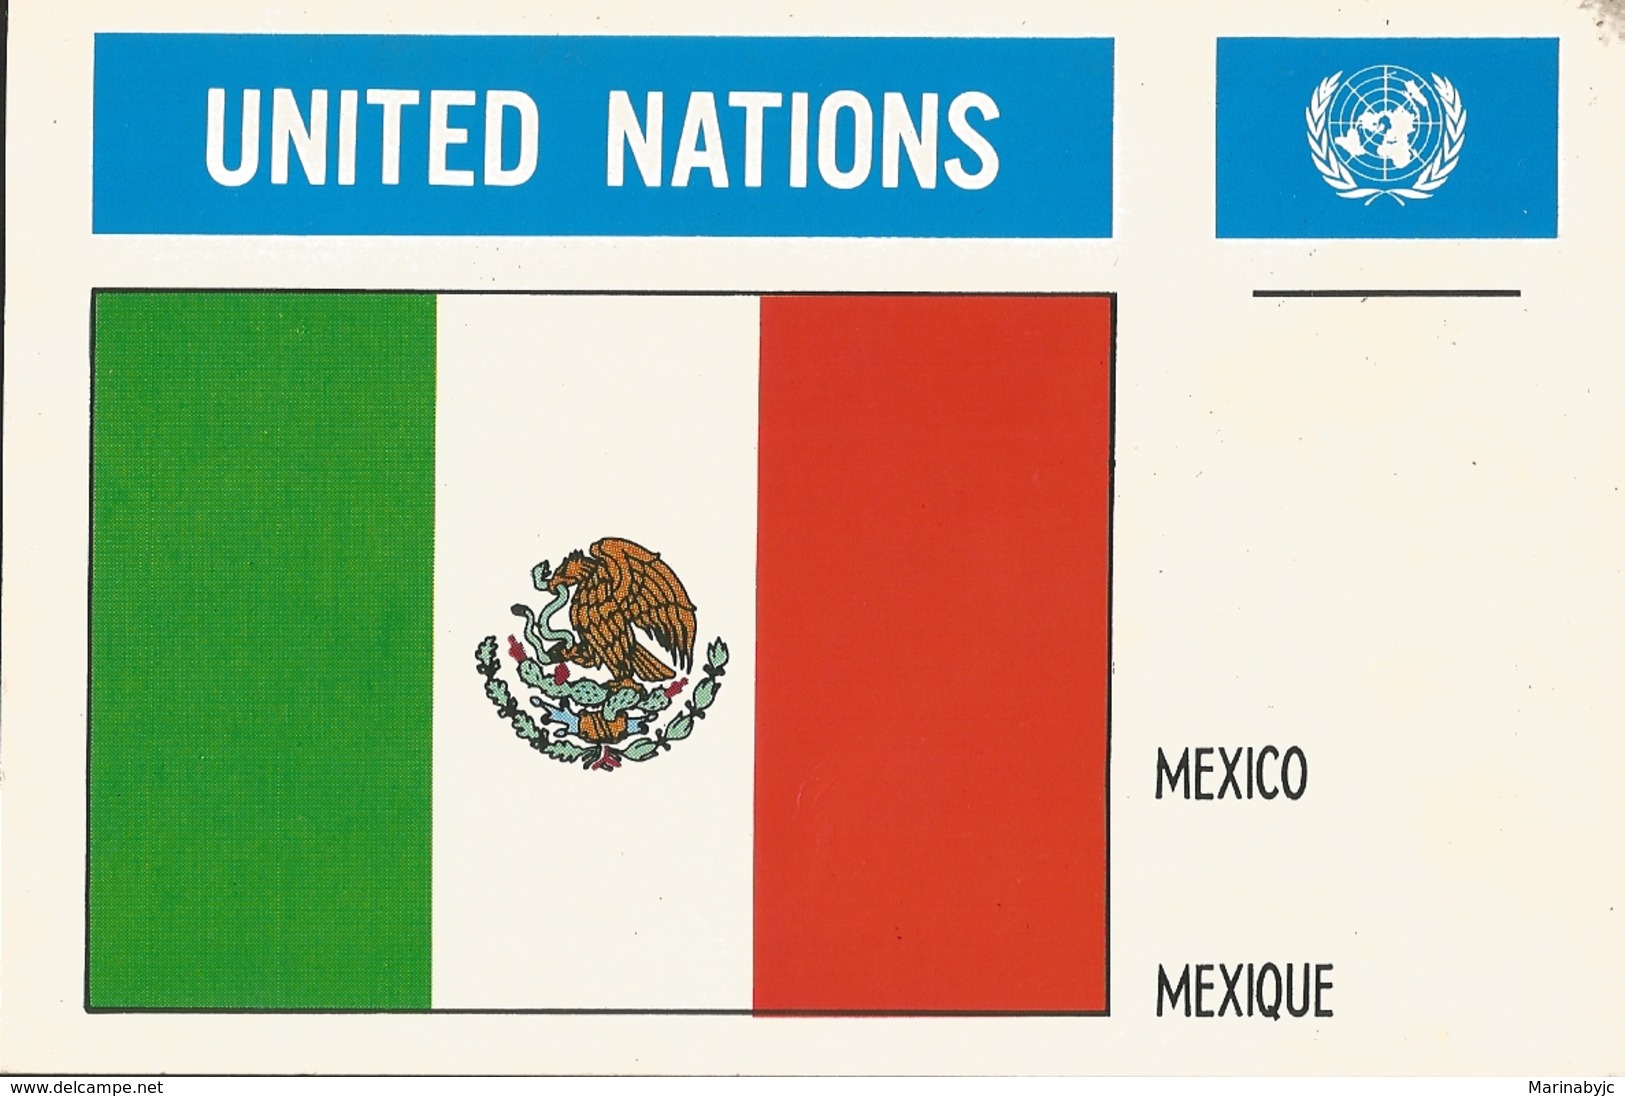 J) 1981 MEXICO, UNITED NATIONS, FLAG OF MEXICO, POST CARD - Mexico